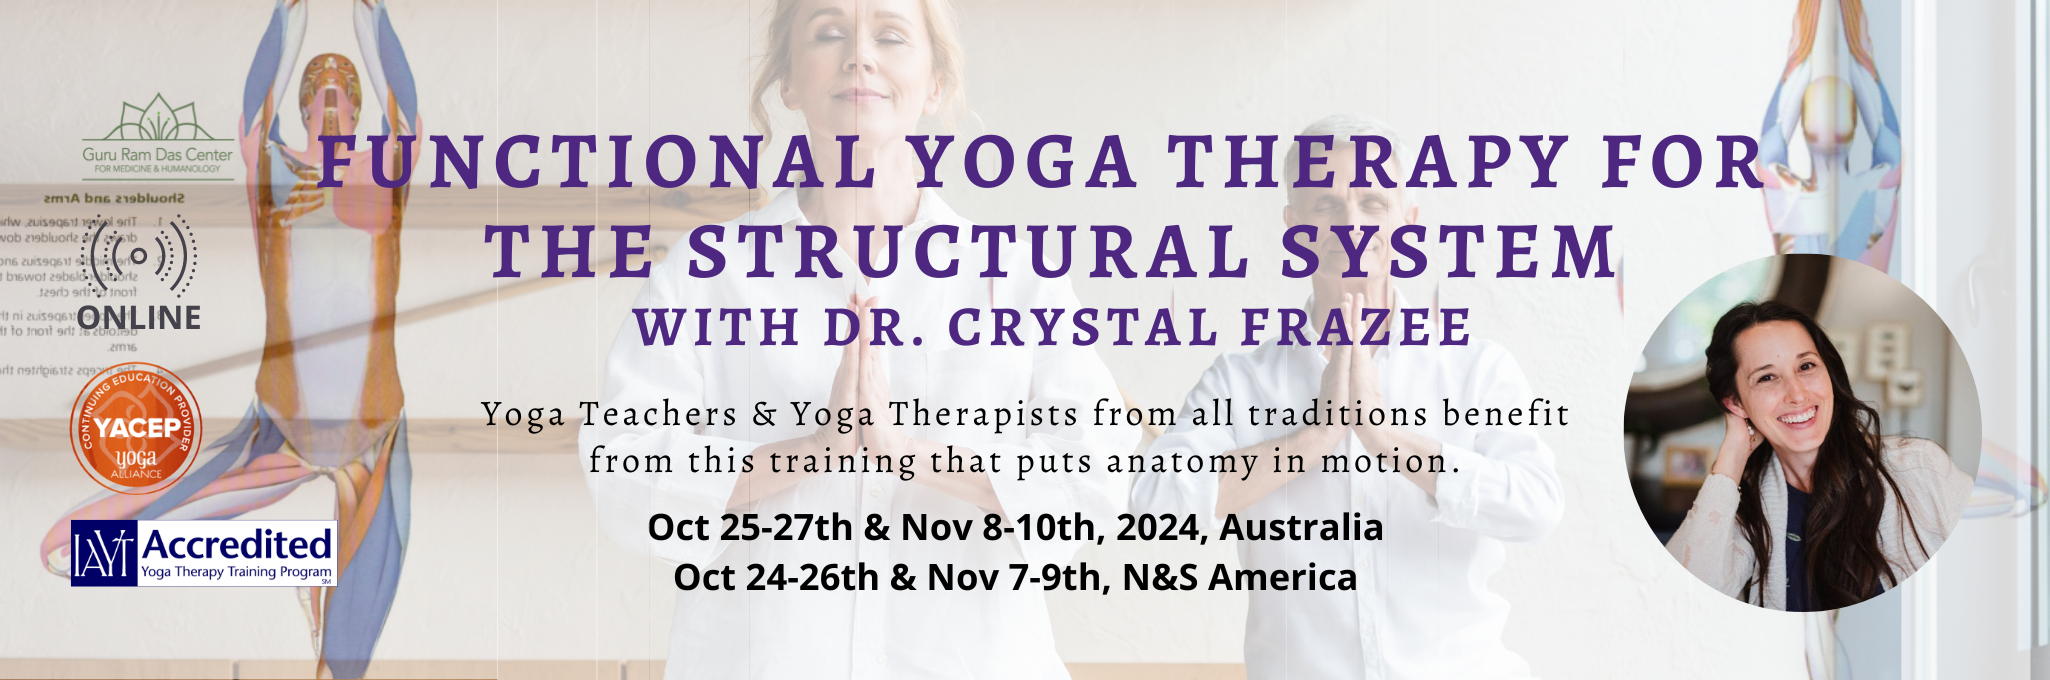 Functional Yoga Therapy Course